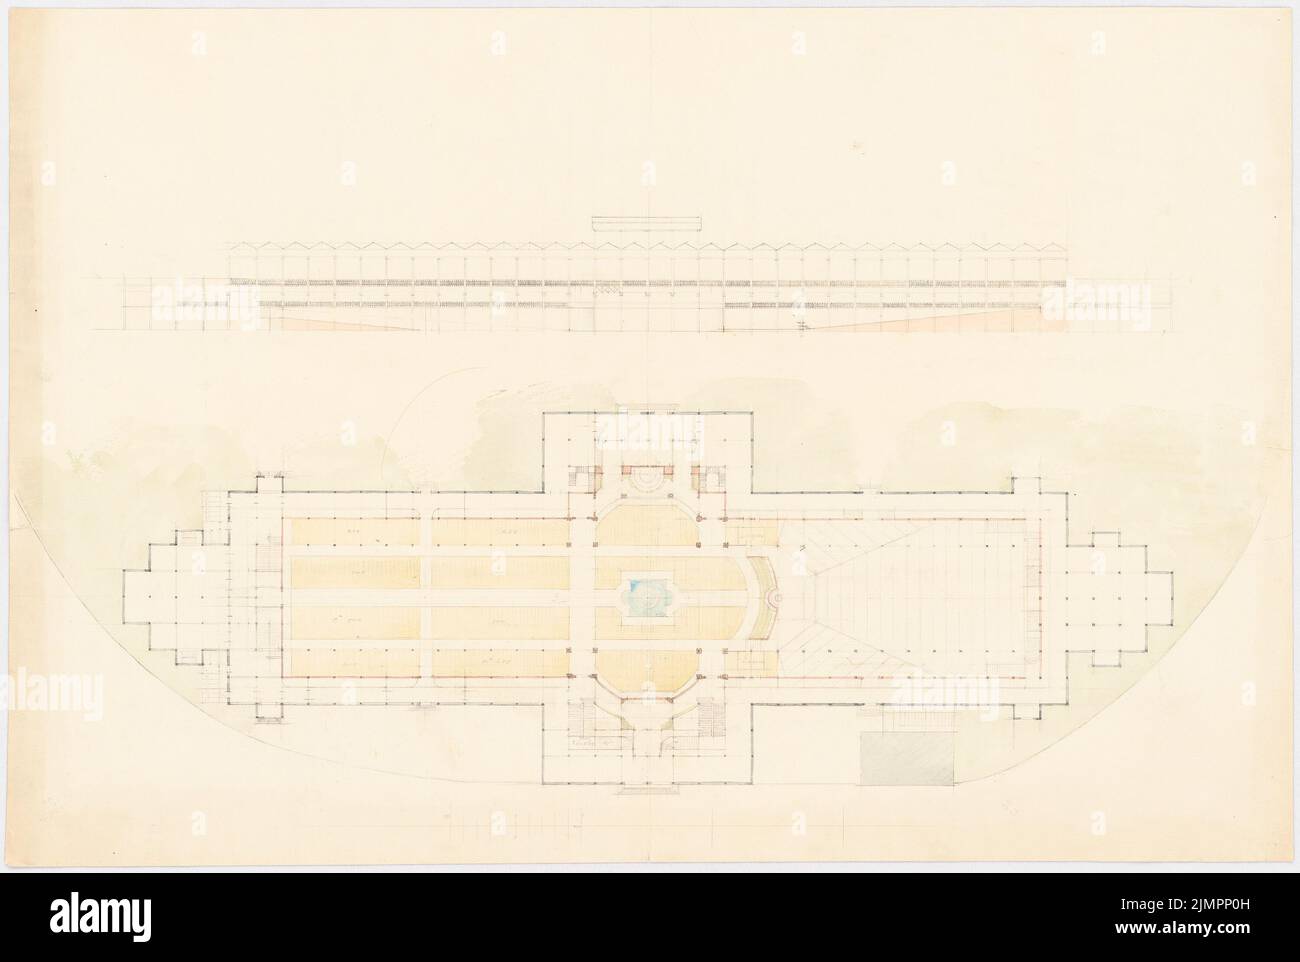 Lange Emil (1841-1926), glass palace in Munich. Remodeling (without date): floor plan, longitudinal section (probably with concert hall). Pencil watercolored on paper, 44.9 x 66.9 cm (including scan edges) Lange Emil  (1841-1926): Glaspalast, München. Umgestaltung Stock Photo